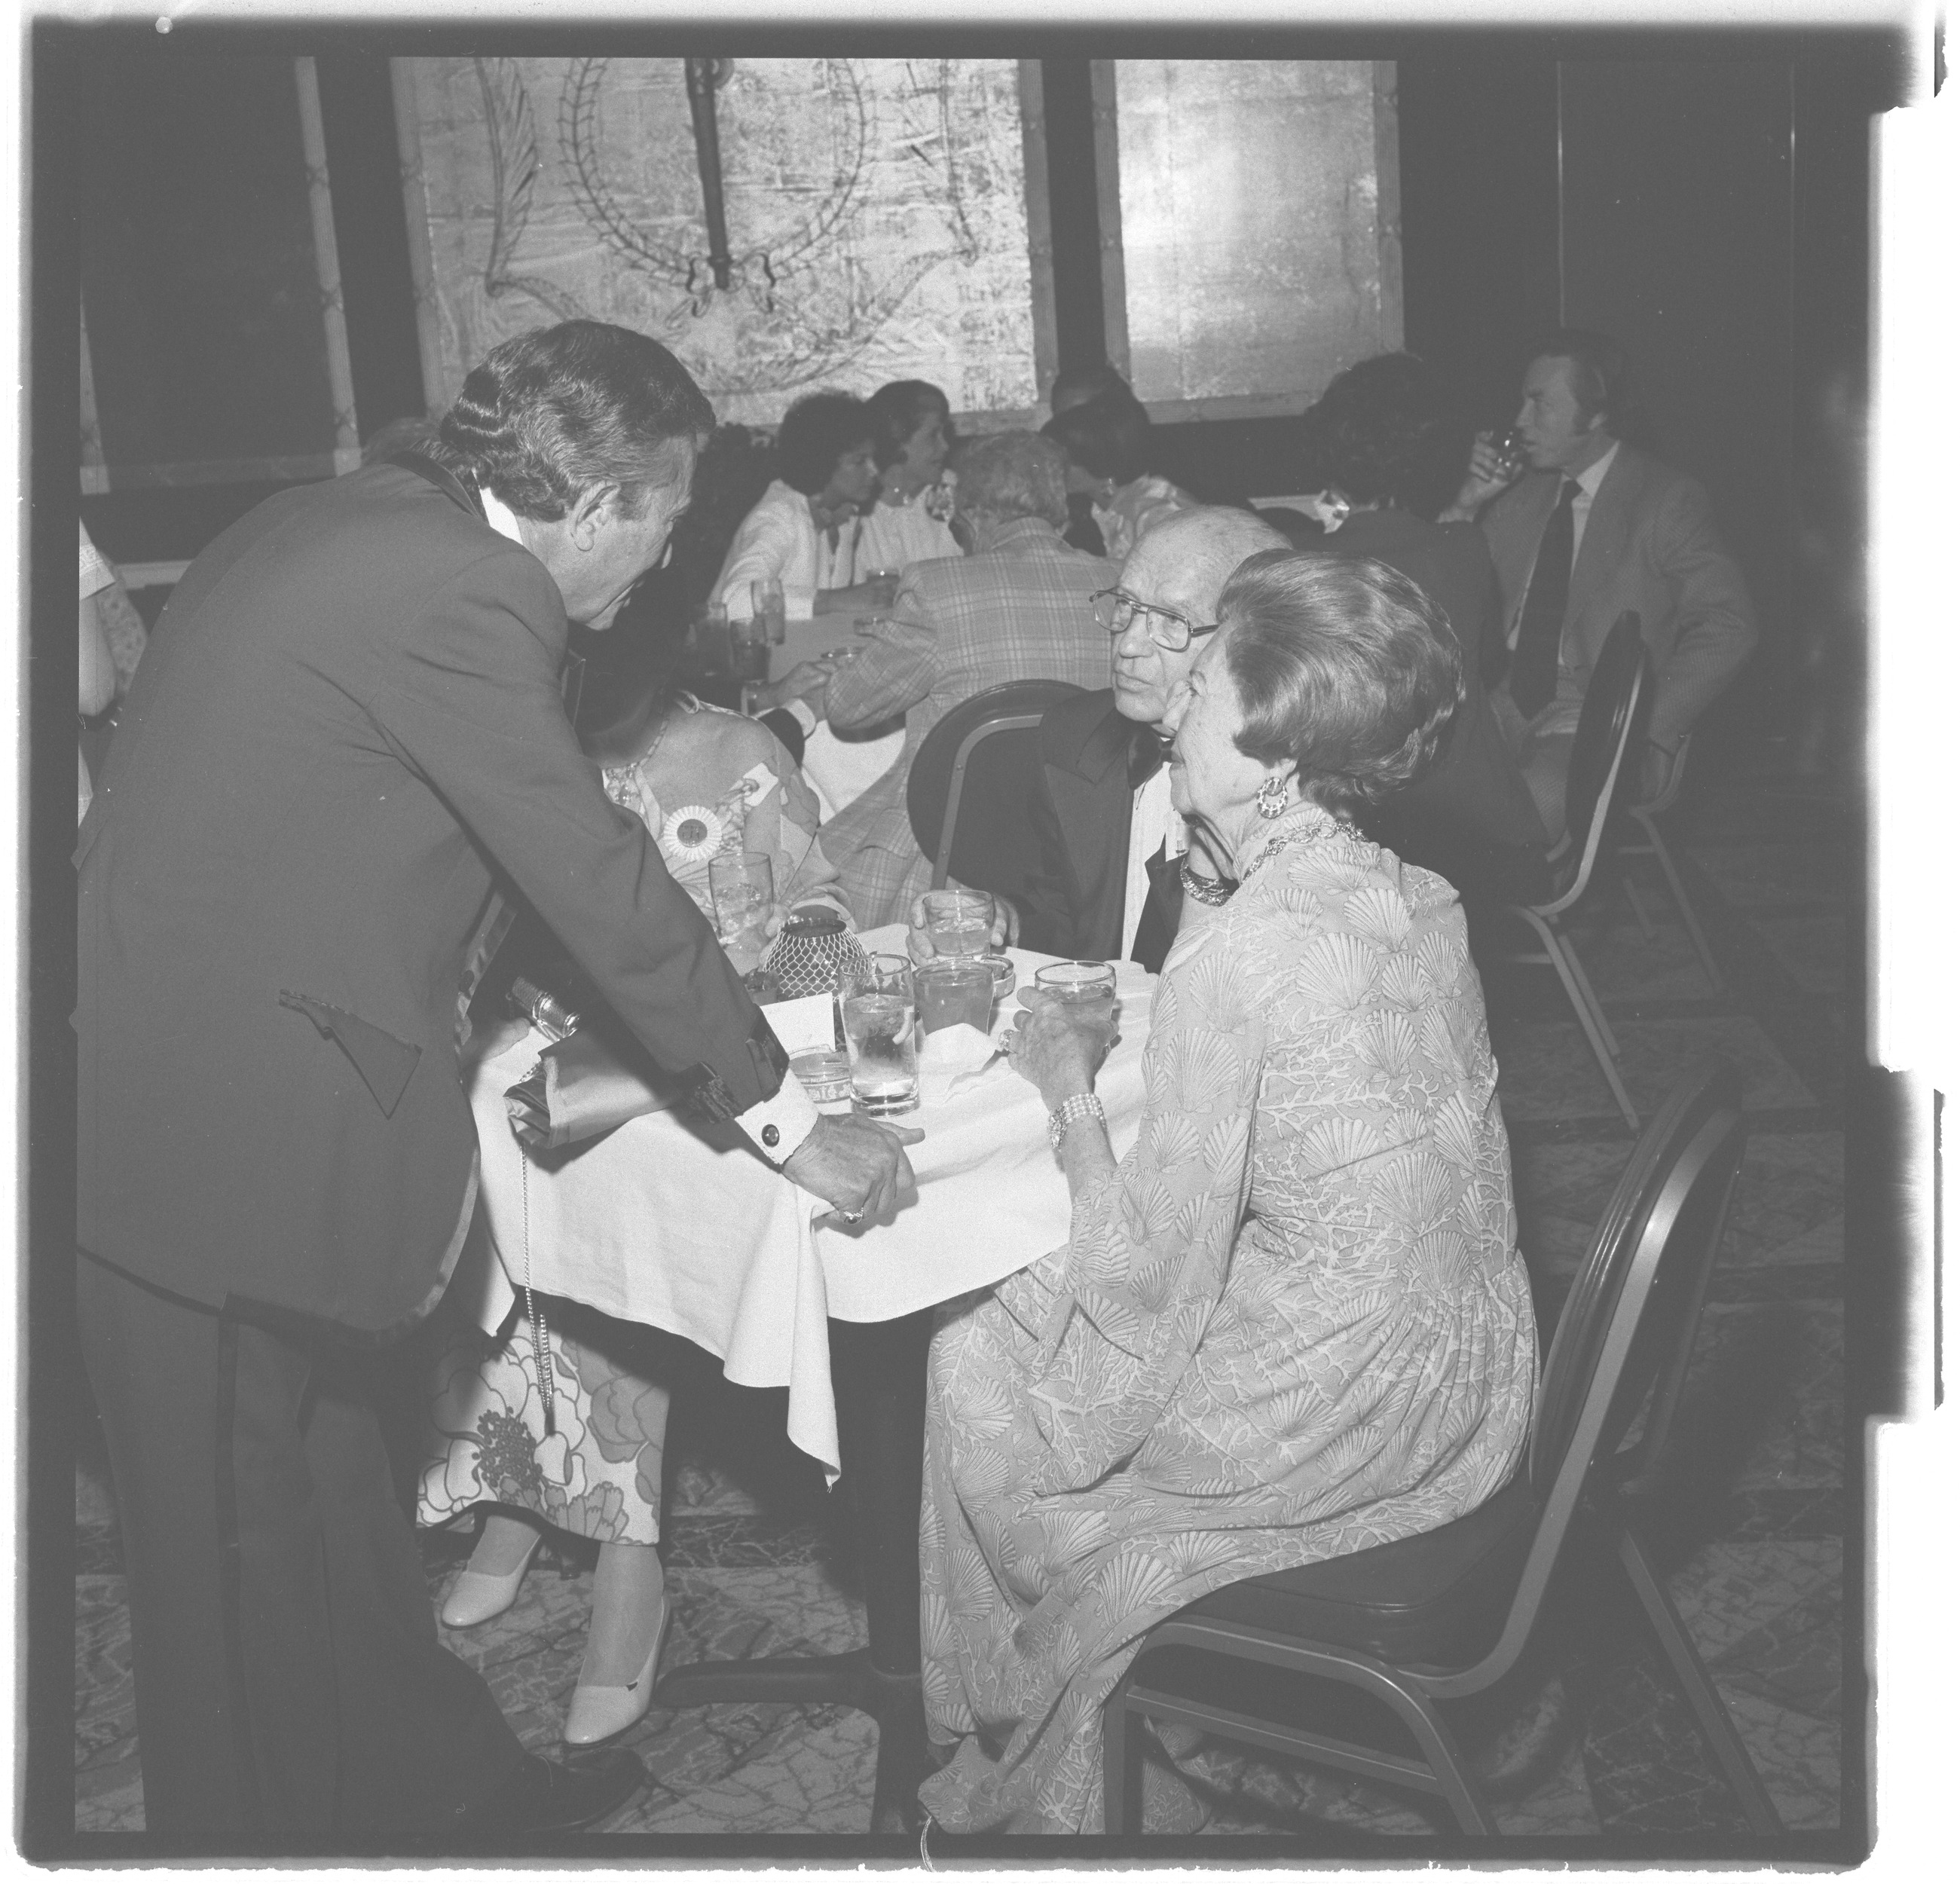 Photographs of Combined Jewish Appeal Caesars Palace yearly fund raising, image 04